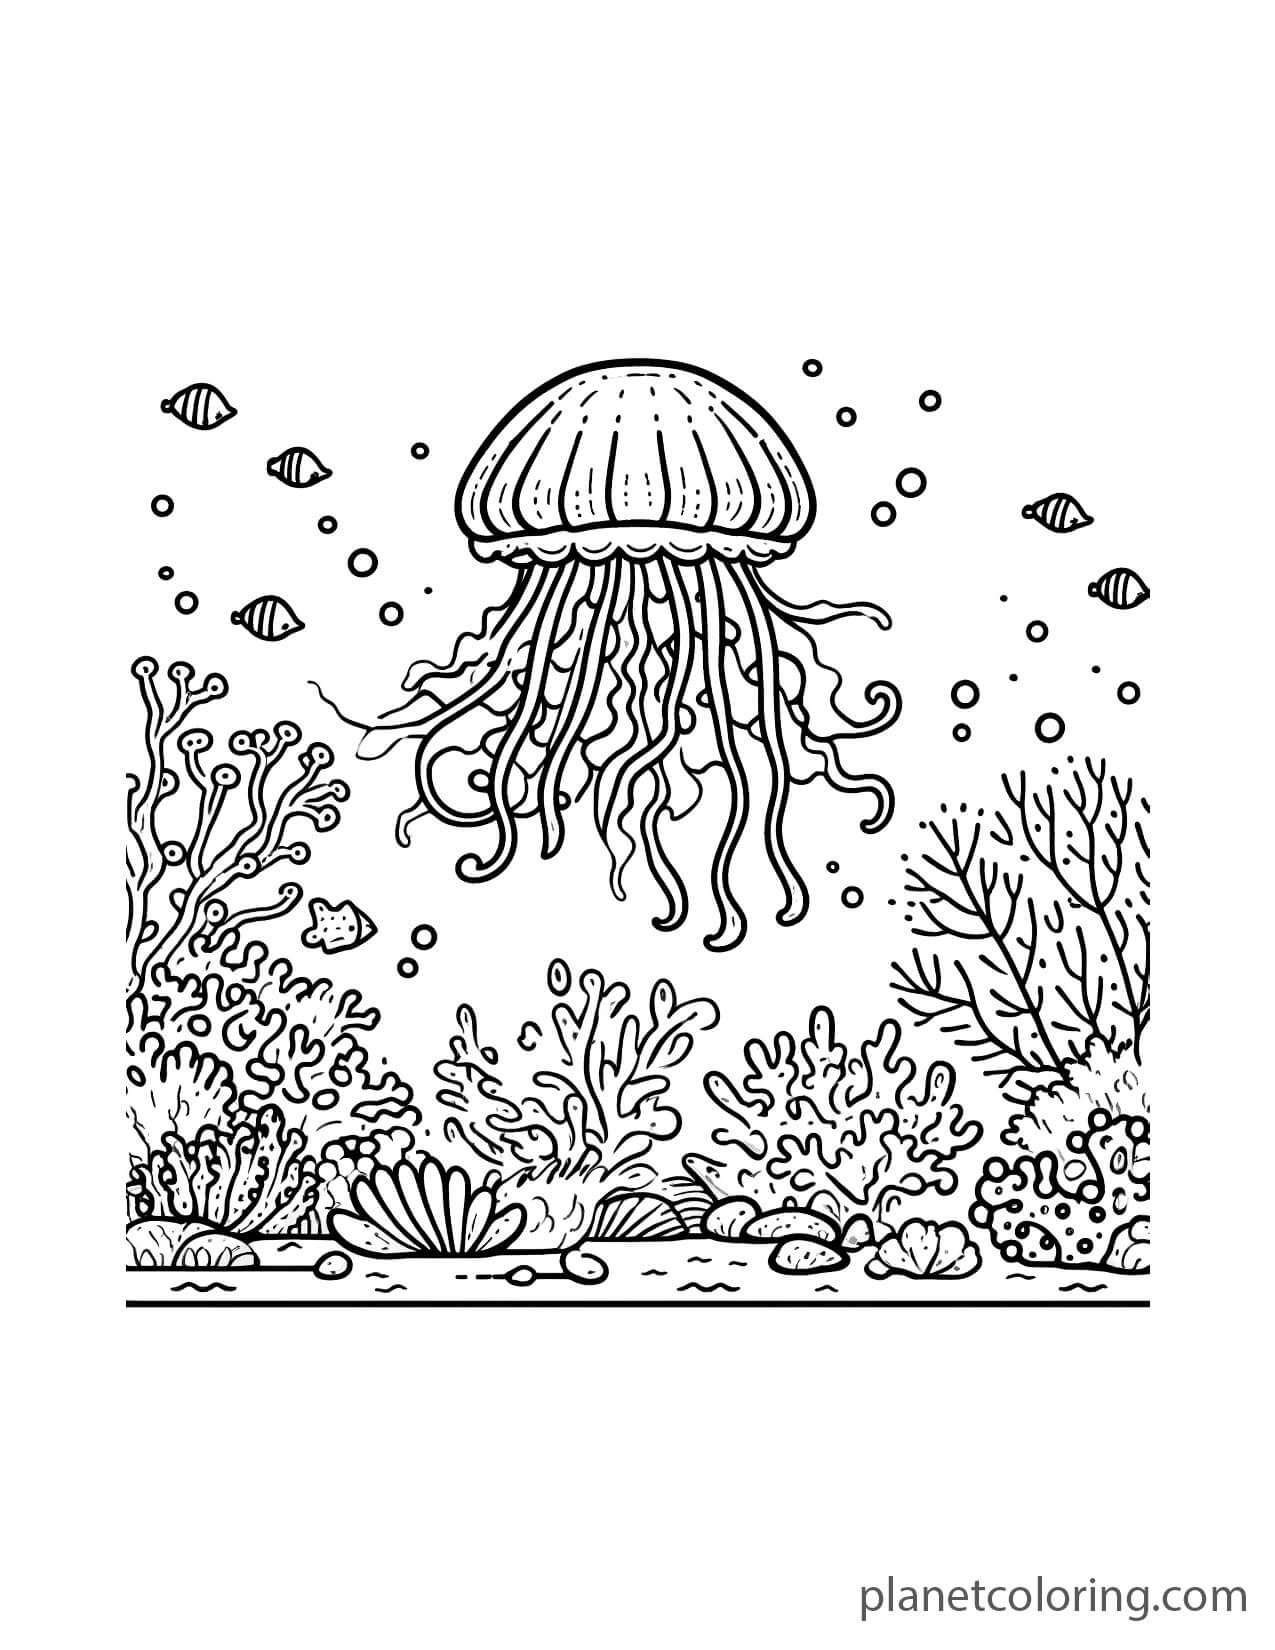 Jellyfish and corals